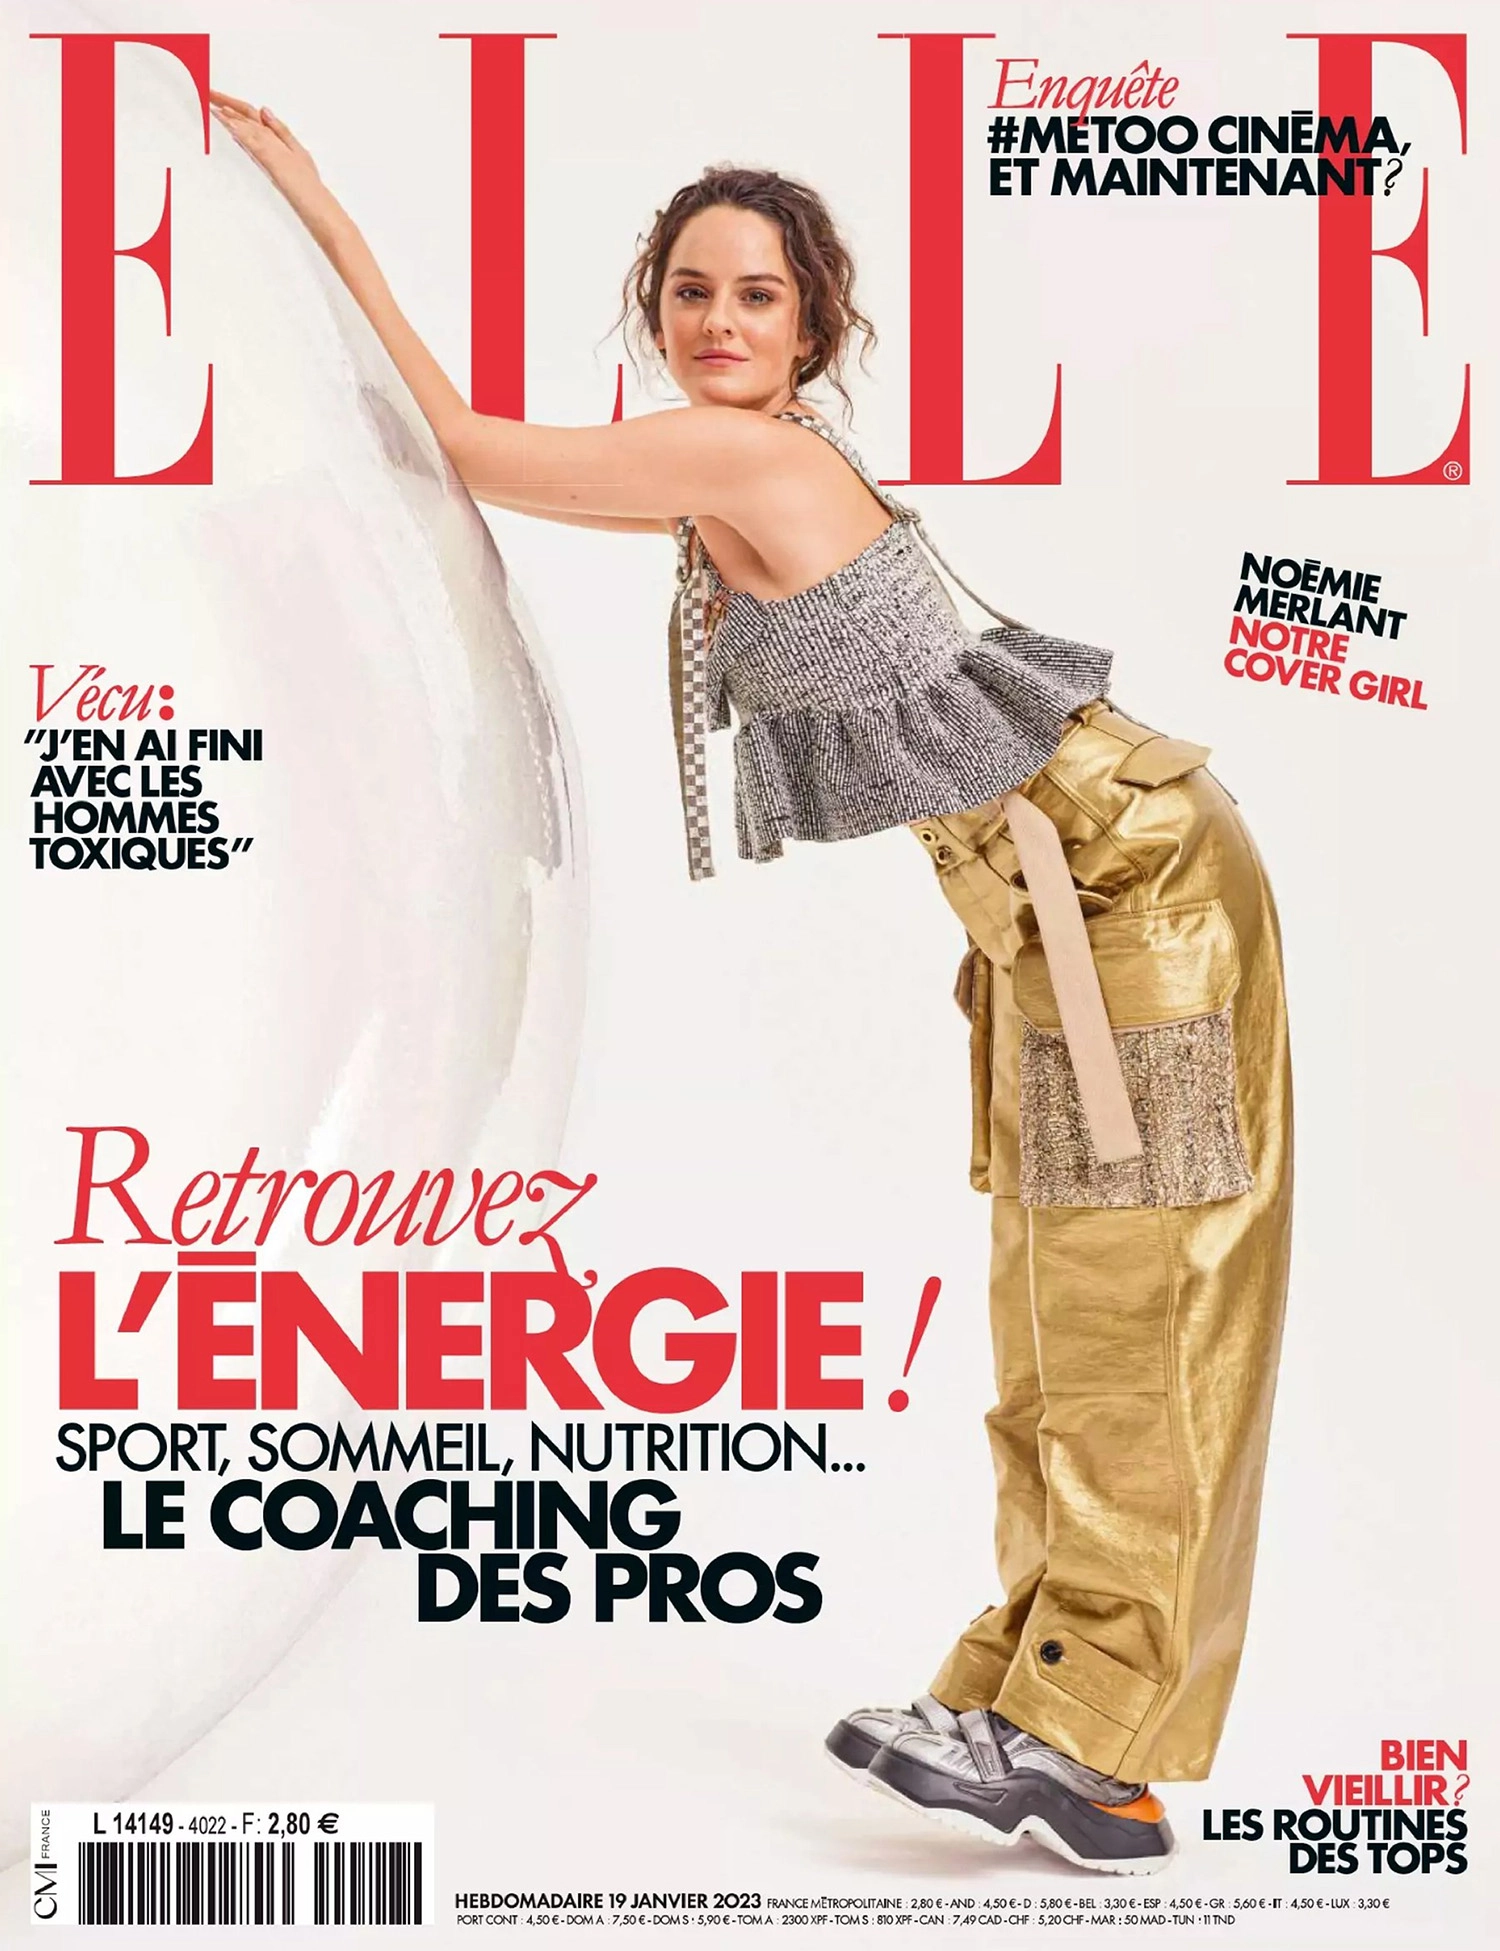 Noémie Merlant covers Elle France January 19th, 2023 by Philippe Jarrigeon